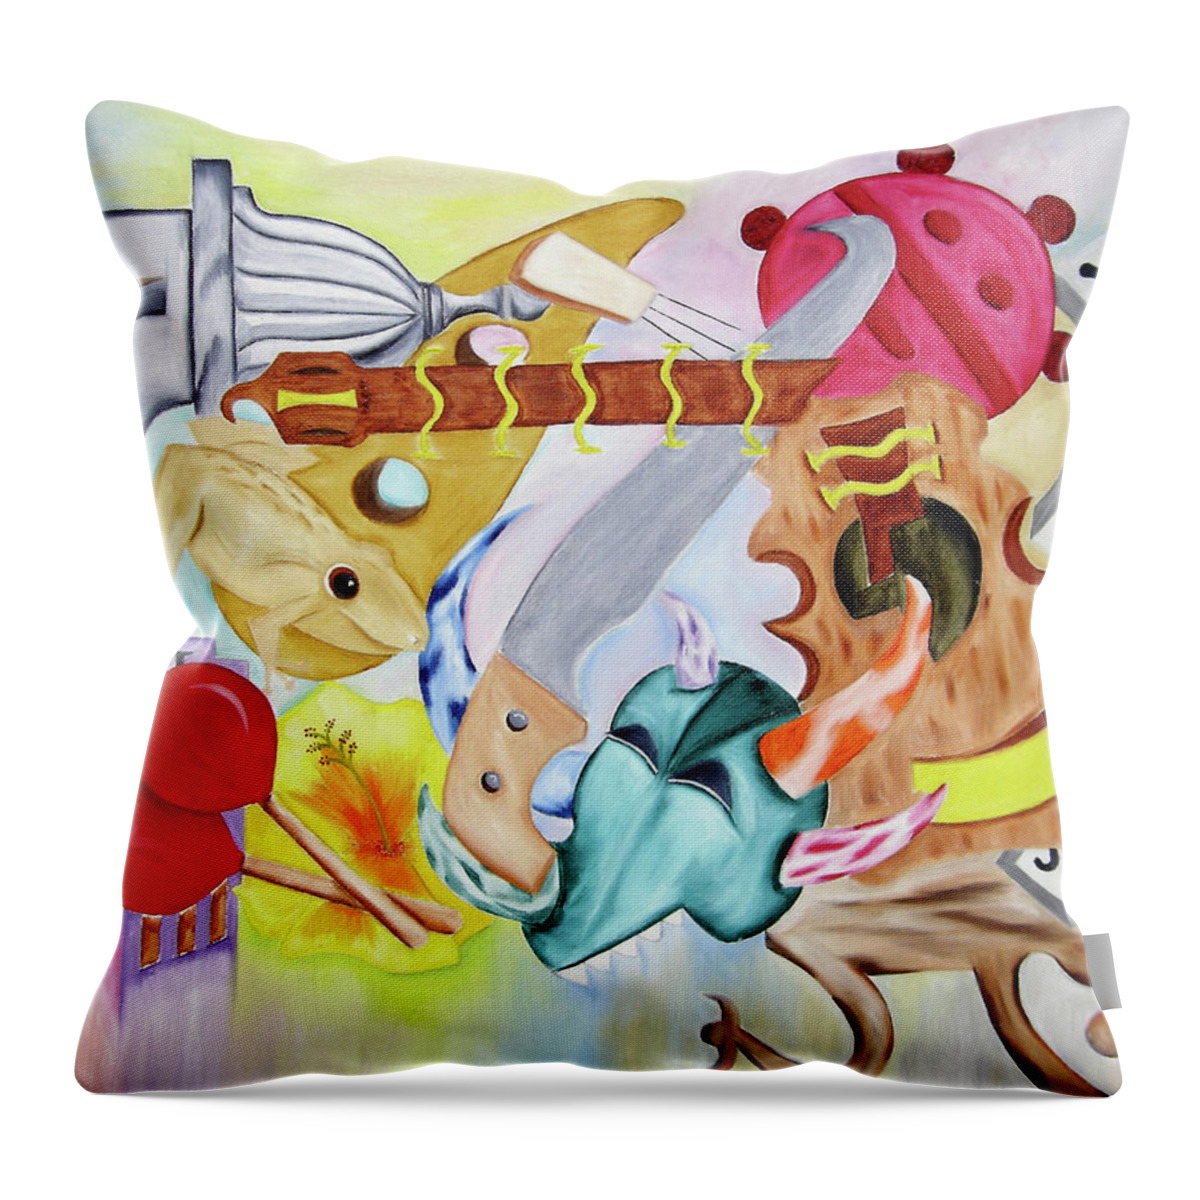 Puerto Rico Throw Pillow featuring the painting La Cultura by Gloria E Barreto-Rodriguez